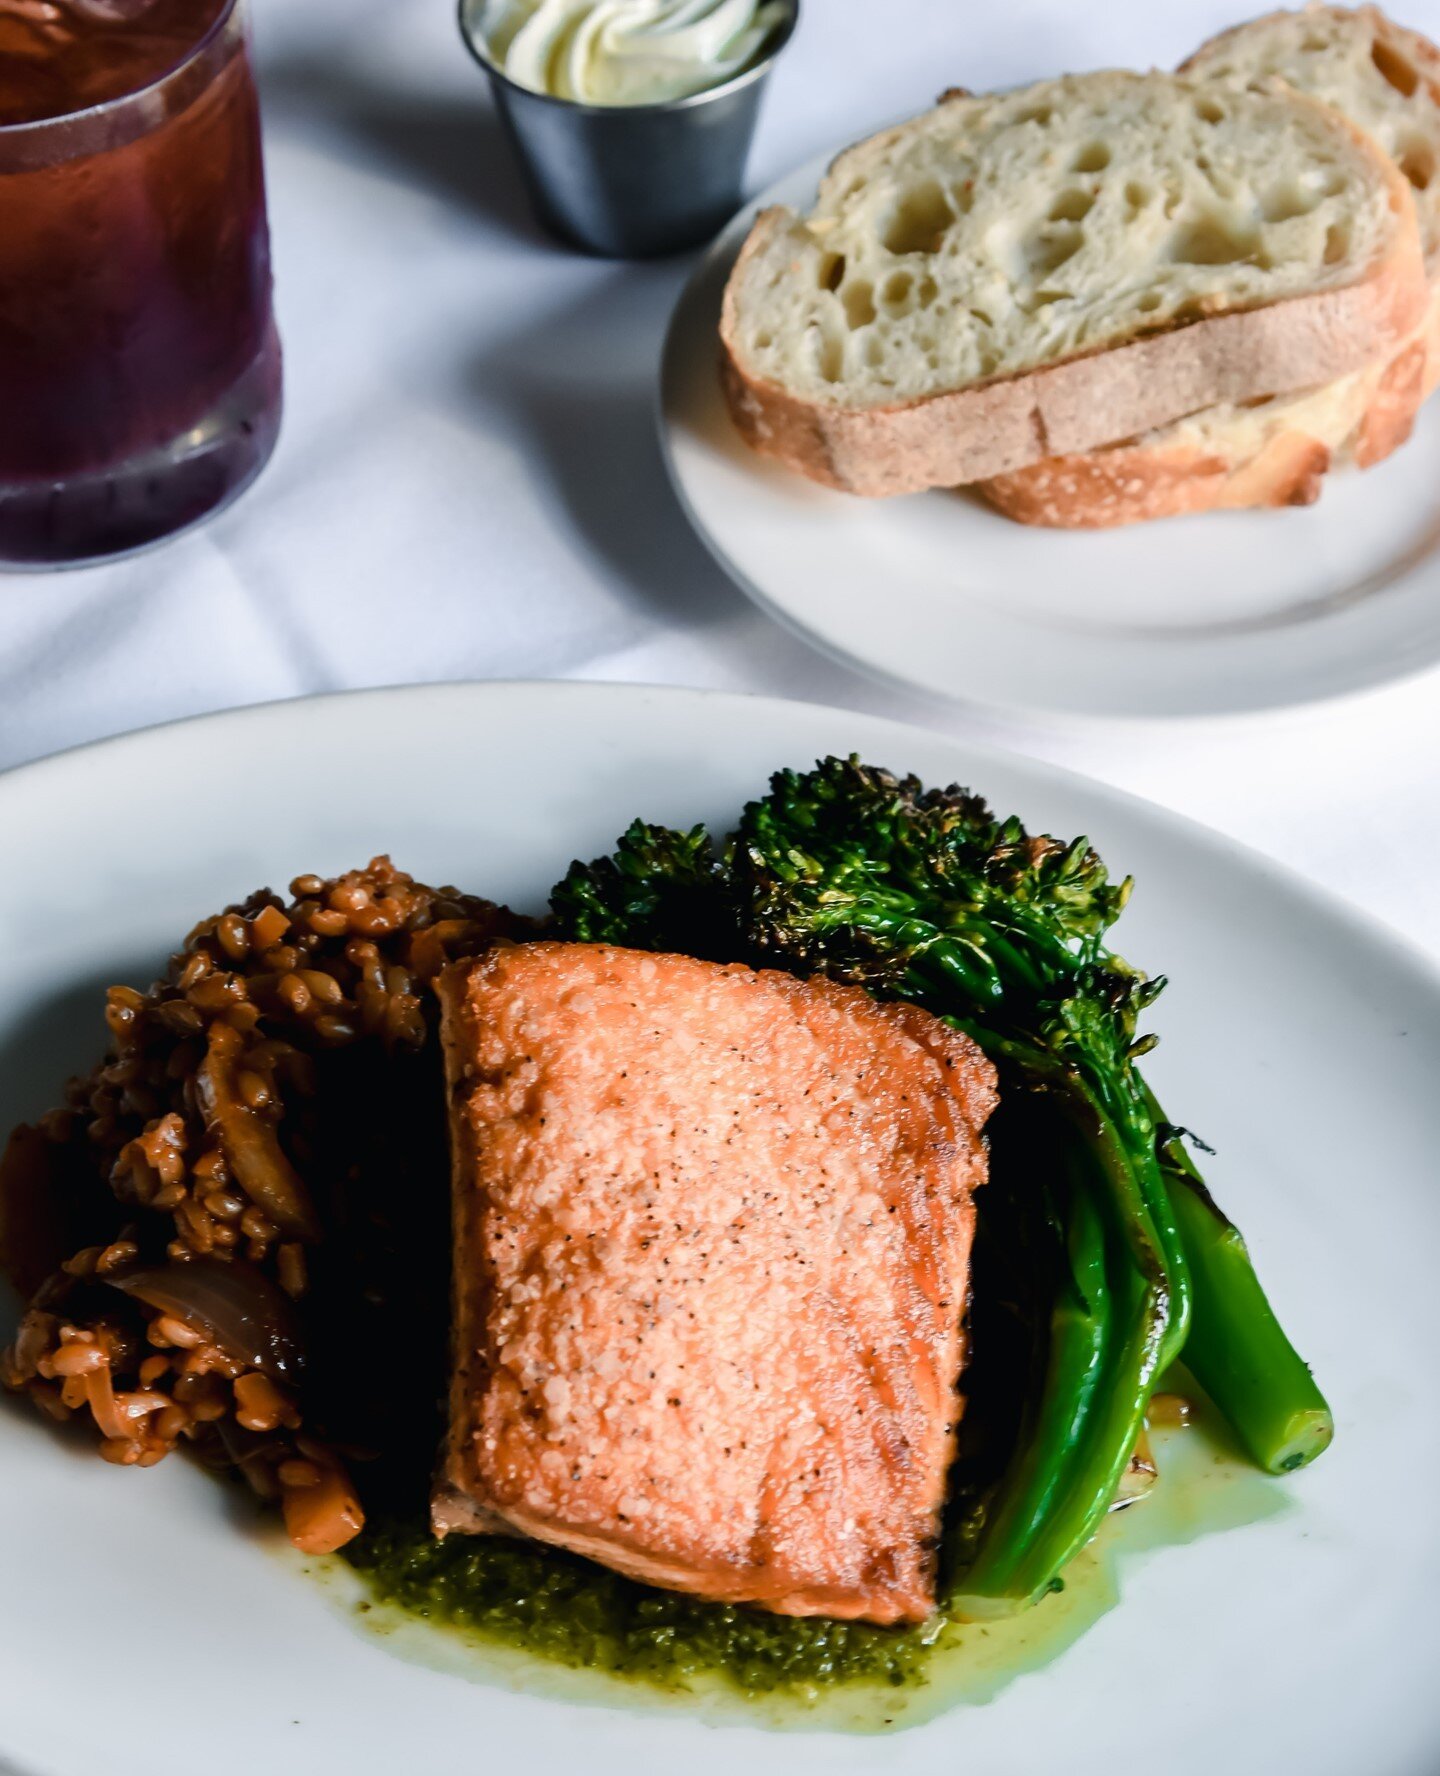 Blue Point serves the absolute freshest and highest-quality seafood available anywhere.⁠
⁠
⭐️ ⭐️ ⭐️ ⭐️ ⭐️ ⁠
⁠
#salmon #seafood #seafoodporn #seafoodlover #seafoodlove #seafoodlovers #seafoodtime #freshseafood #seafoodresturant #seafoodie #seafoods #c